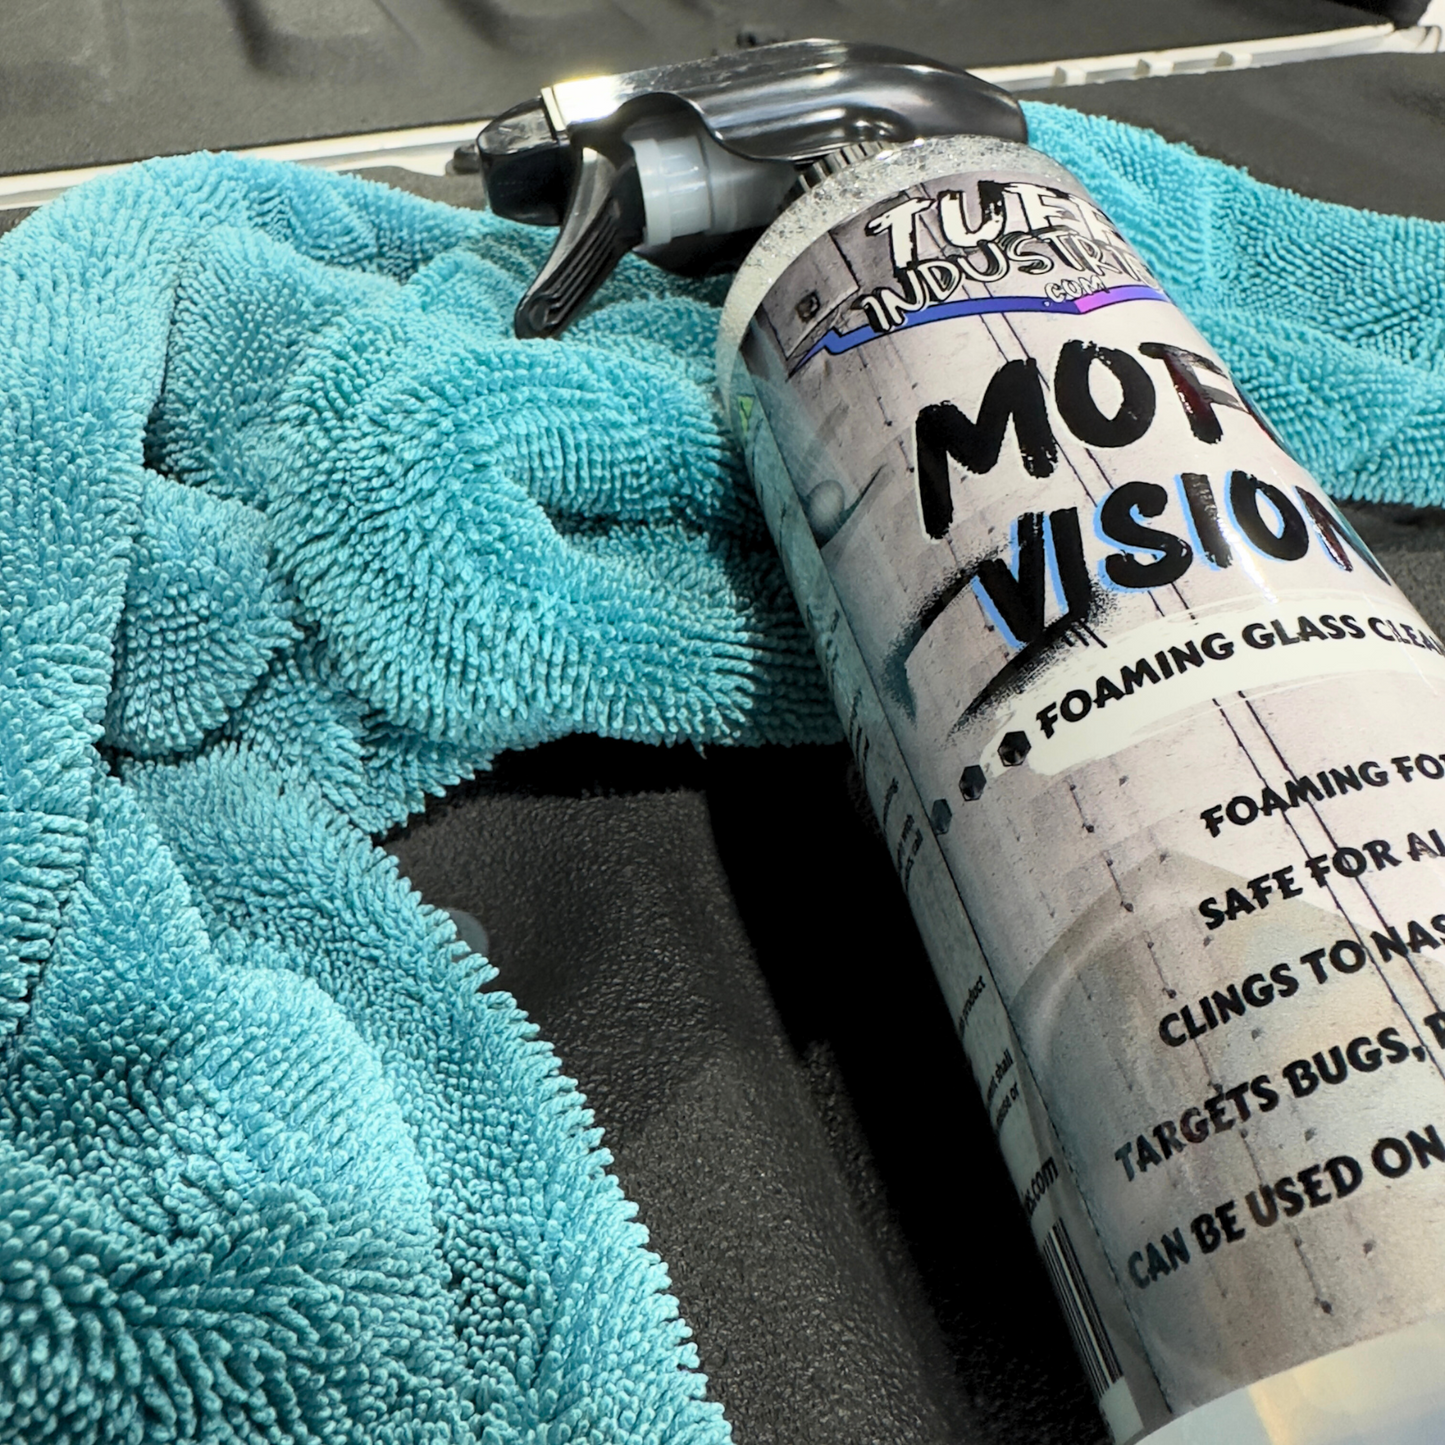 MOFO Vision - Foaming Glass Cleaner